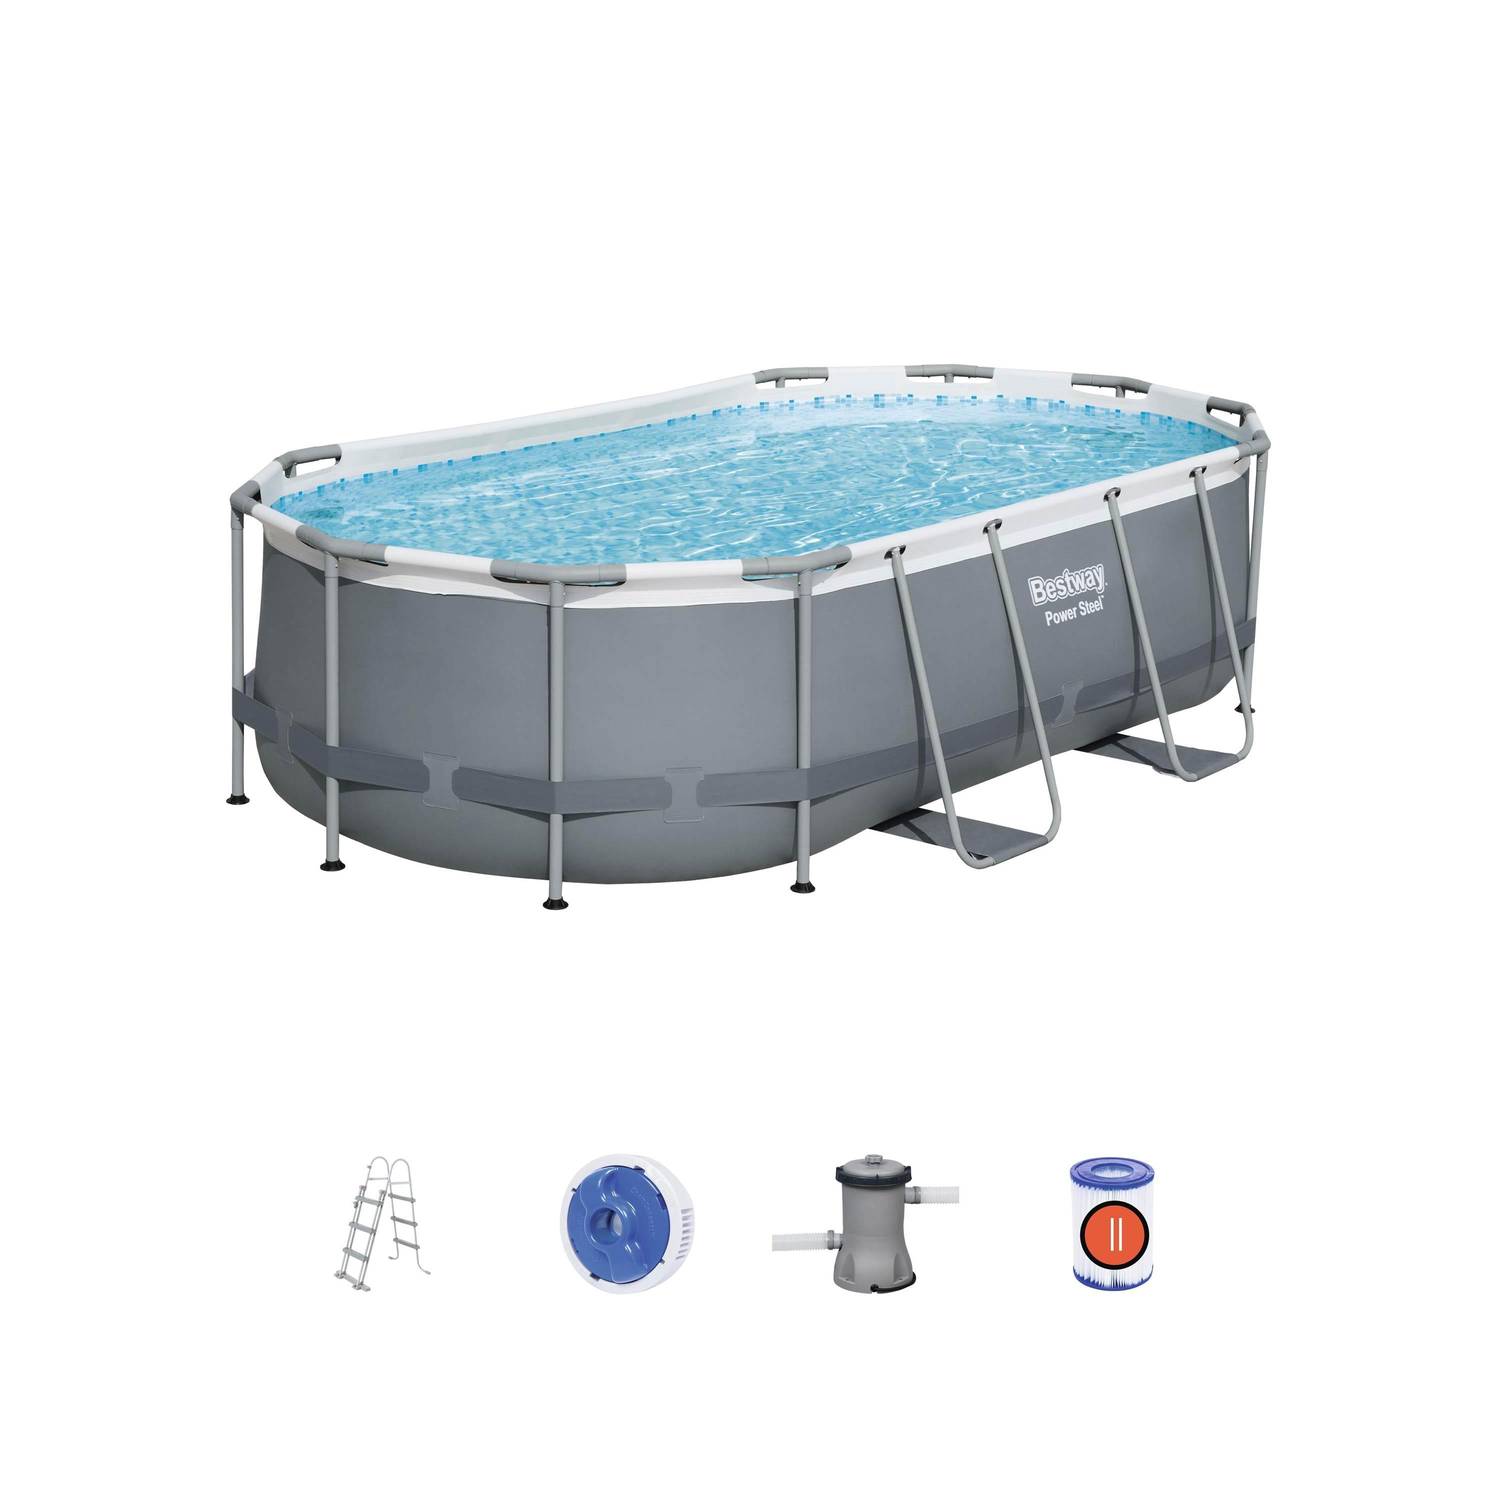 4x2m above ground tubular swimming pool, grey, oval, with pump, filter cartridge, diffuser and ladder - Bestway Spinelle - Grey Photo2